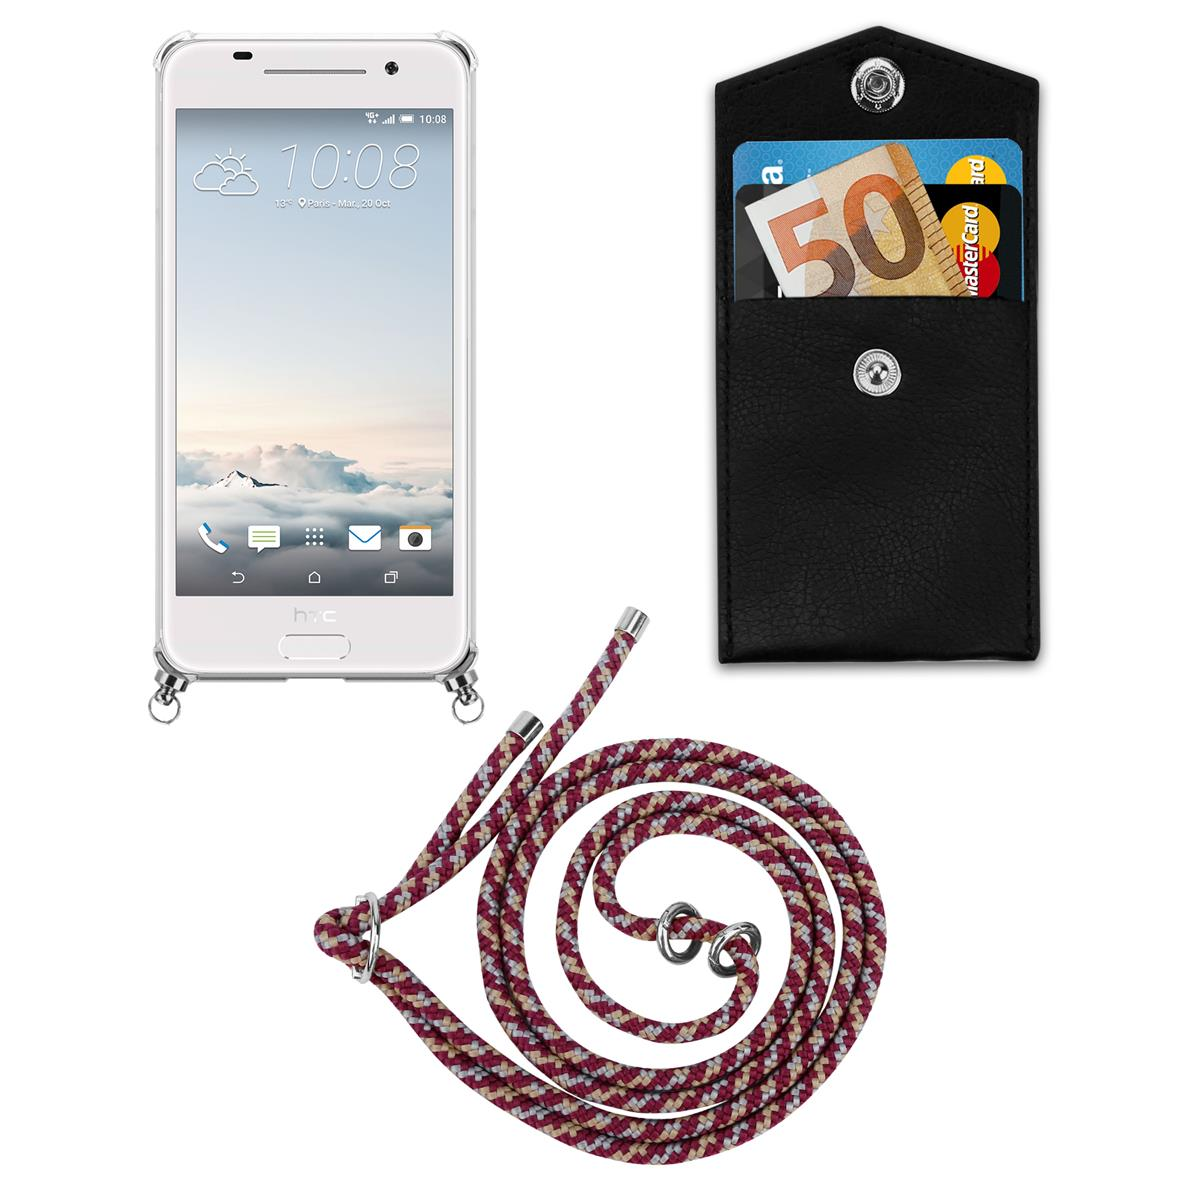 CADORABO Handy Kette mit Silber Ringen, abnehmbarer Band HTC, WEIß ROT Backcover, Hülle, ONE A9, GELB Kordel und